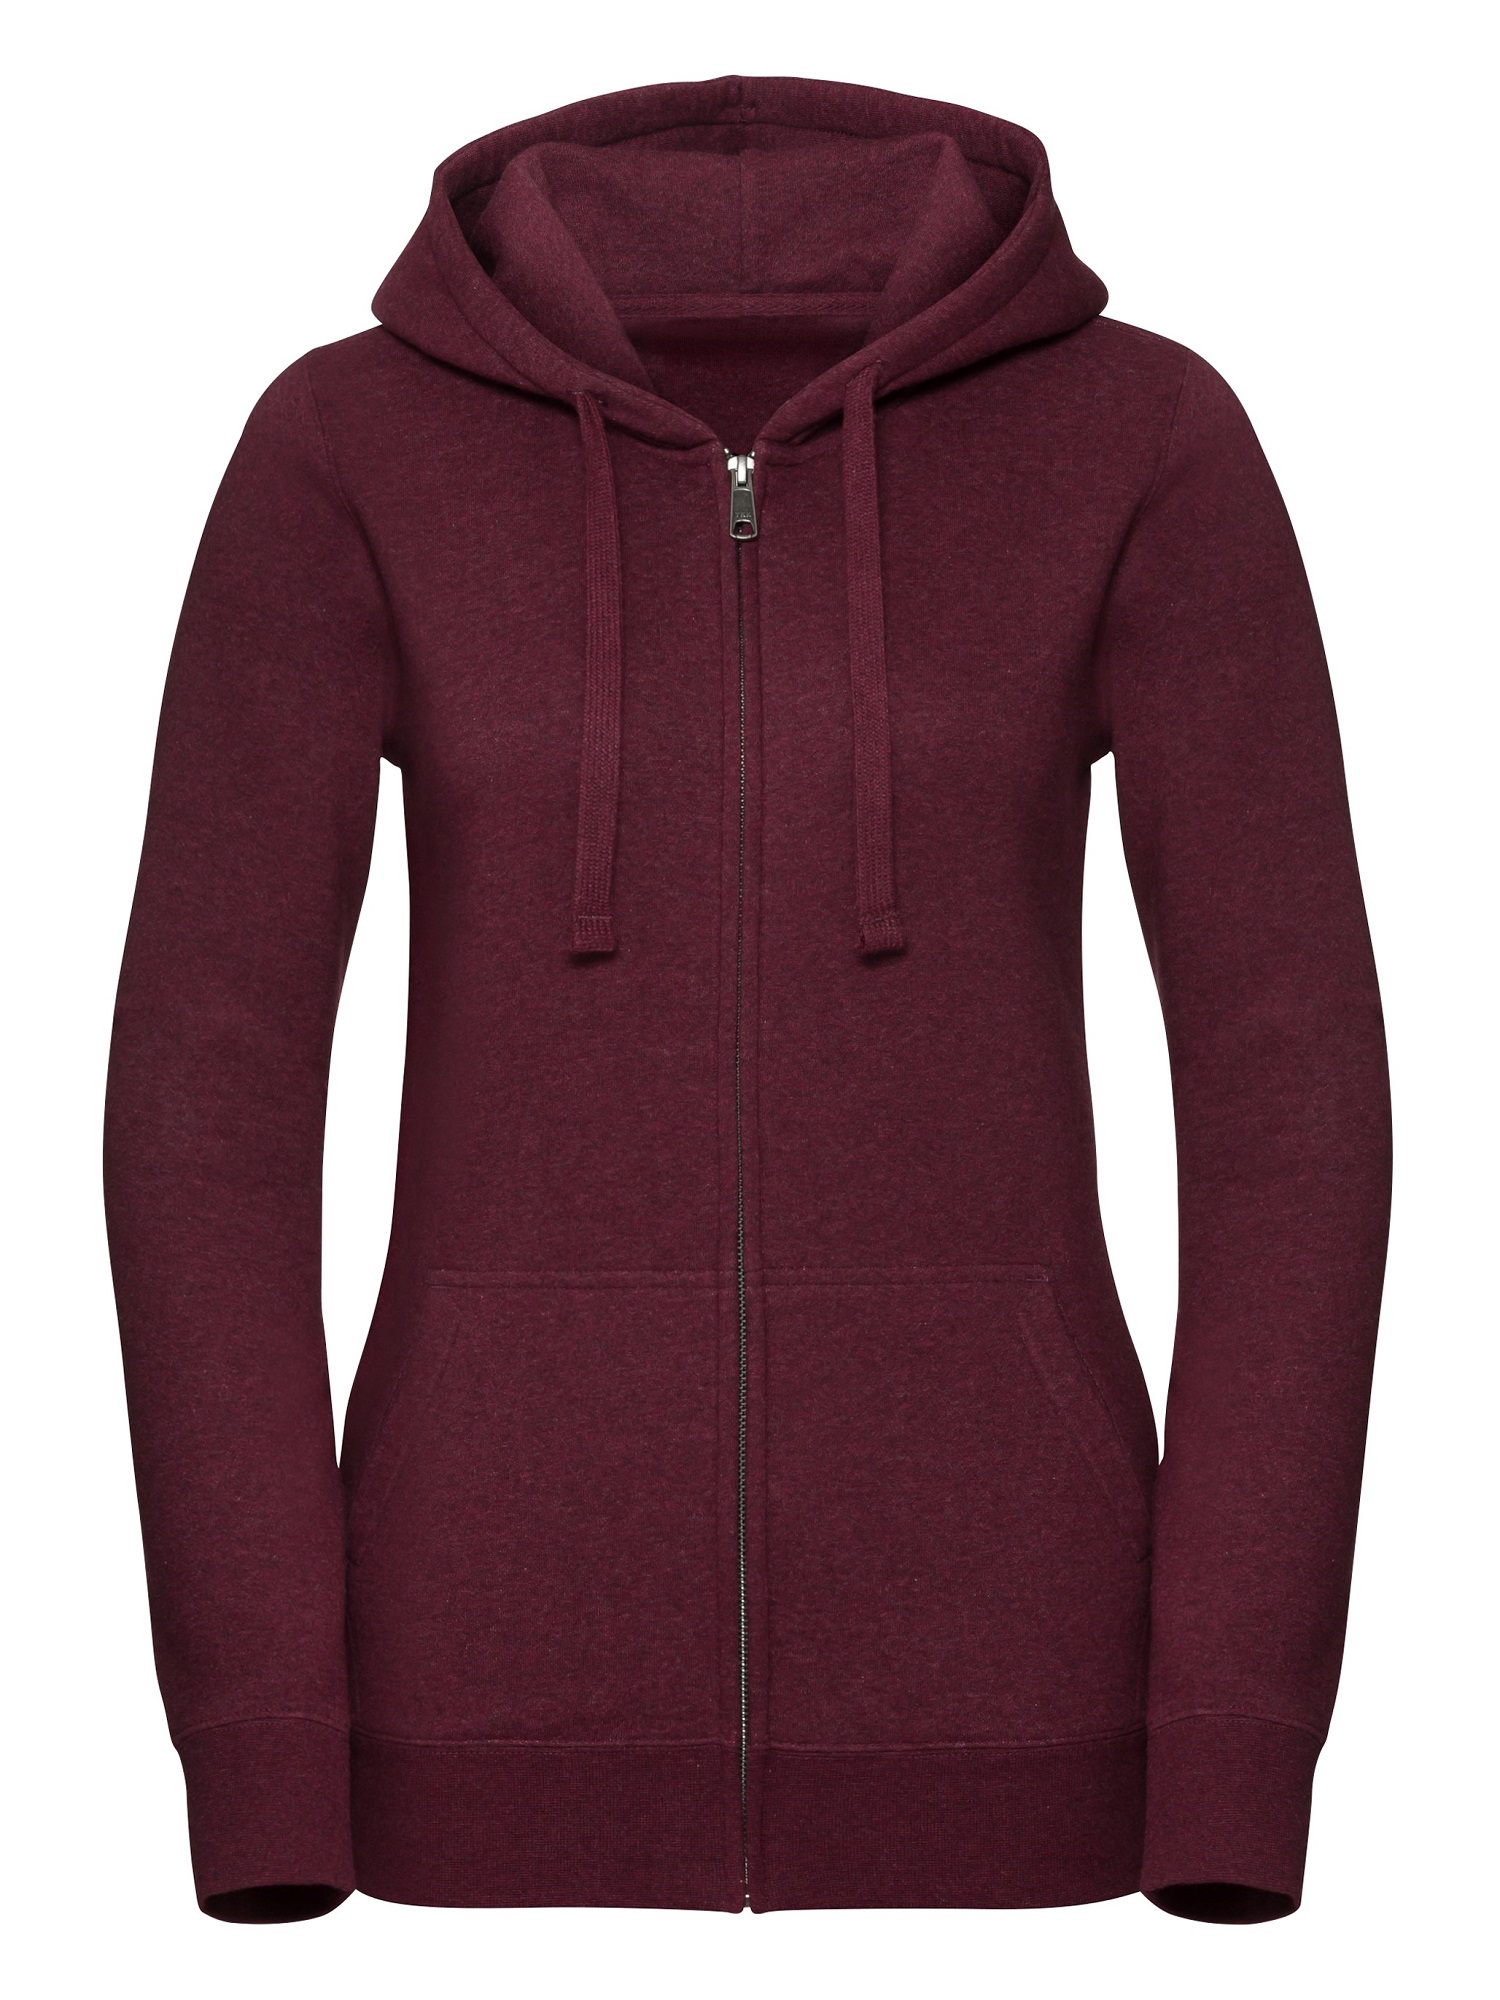 Women's Authentic Melange Zipped Hooded Sweat Russell